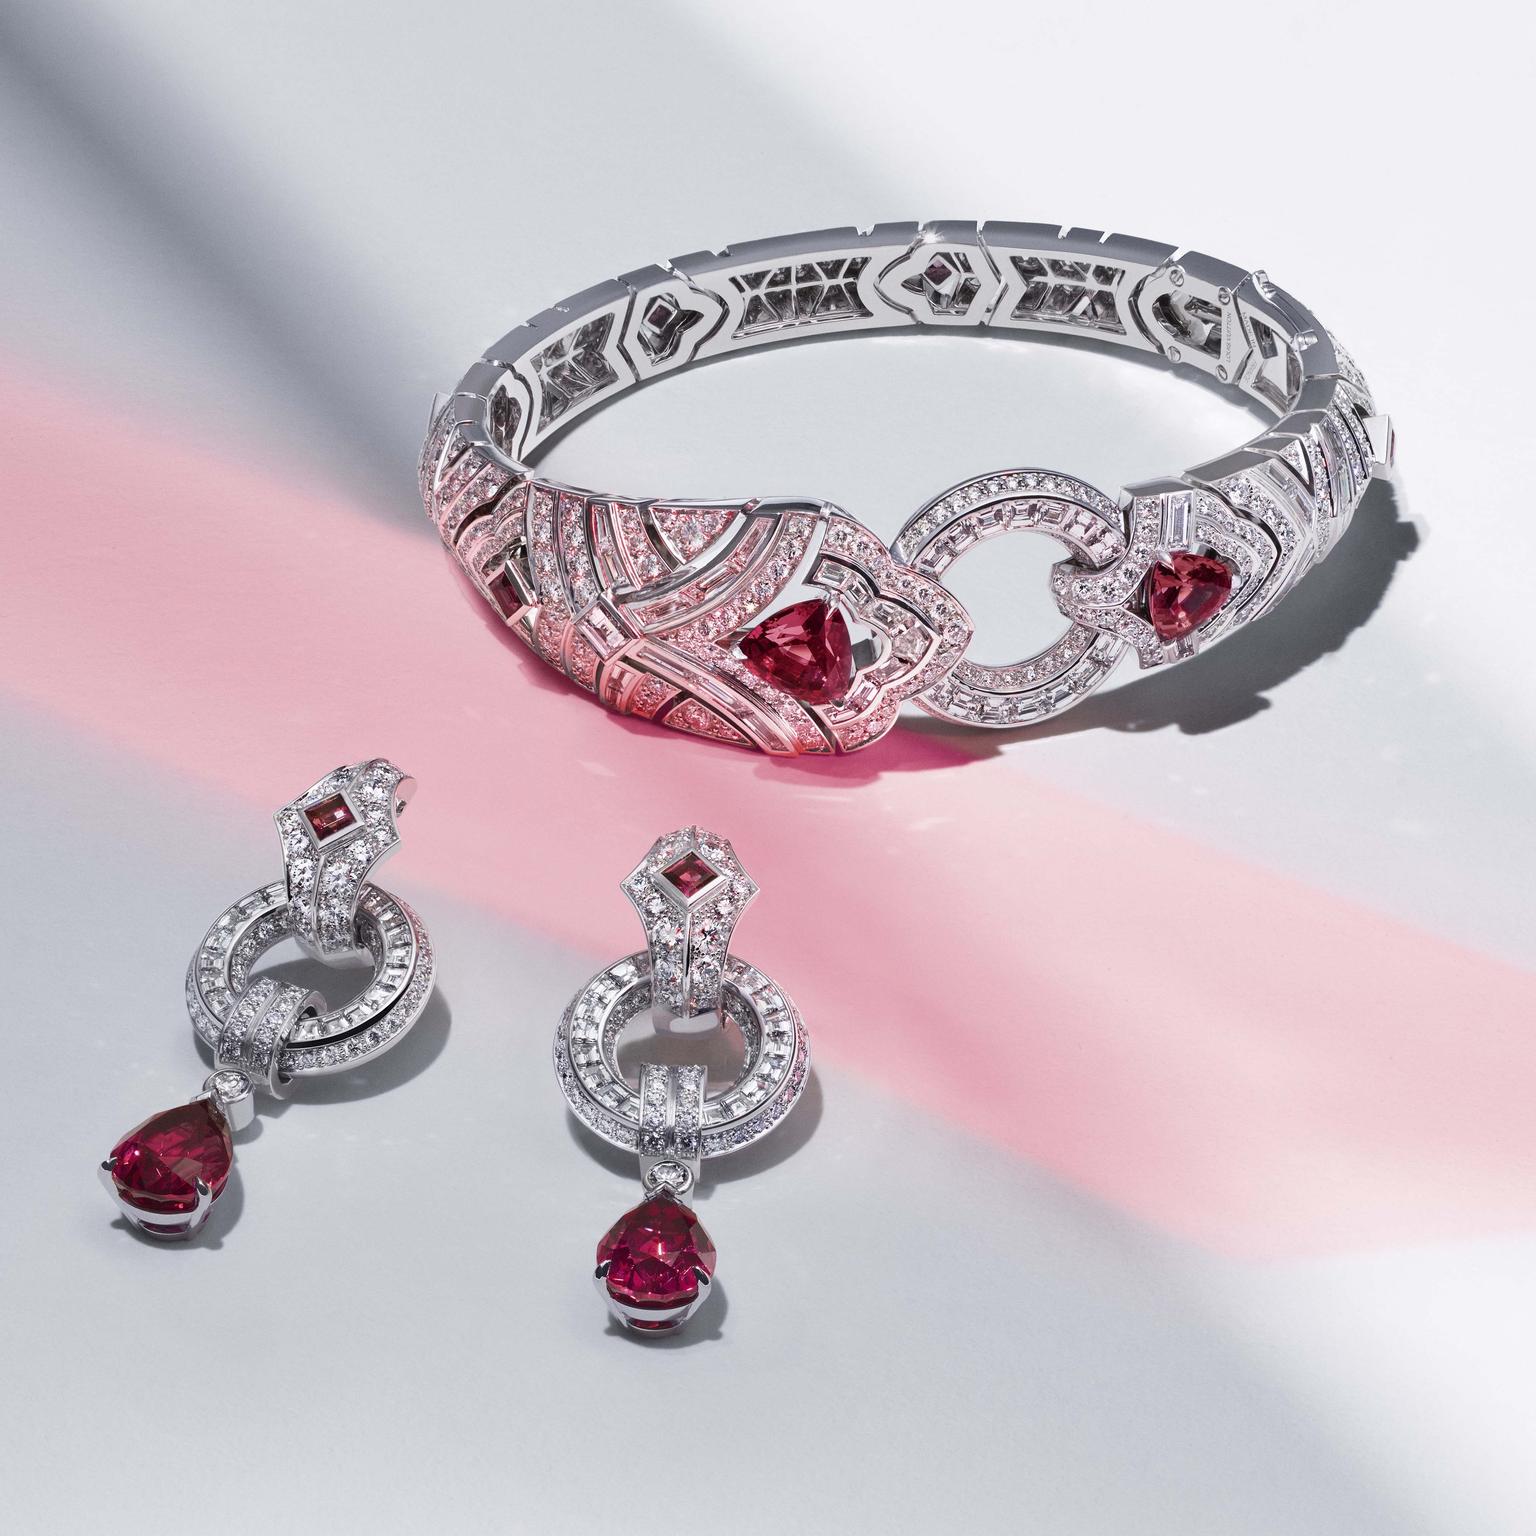 Louis Vuitton Riders of the Knights The La Cavaliere diamond and red spinel  bracelet and earrings, Louis Vuitton